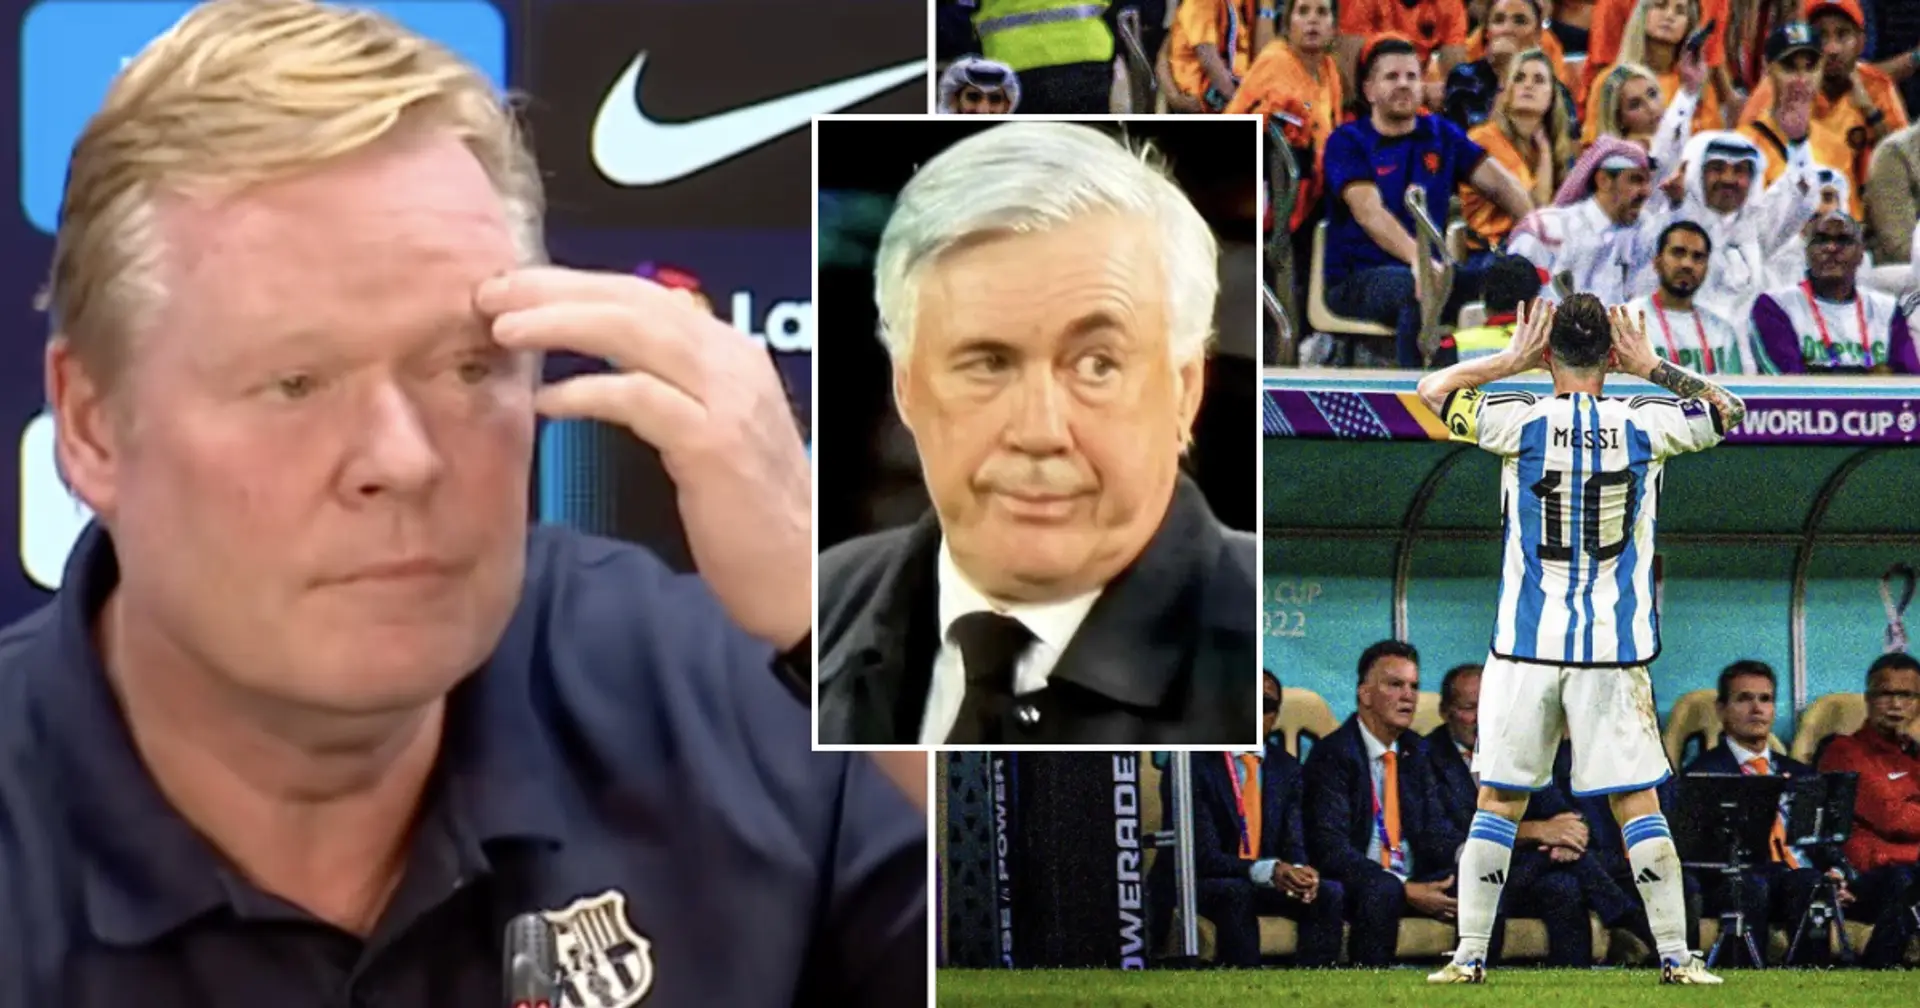 'I felt like Madrid was favoured more than Barca': Koeman reacts to Van Gaal's 'rigged World Cup' claim